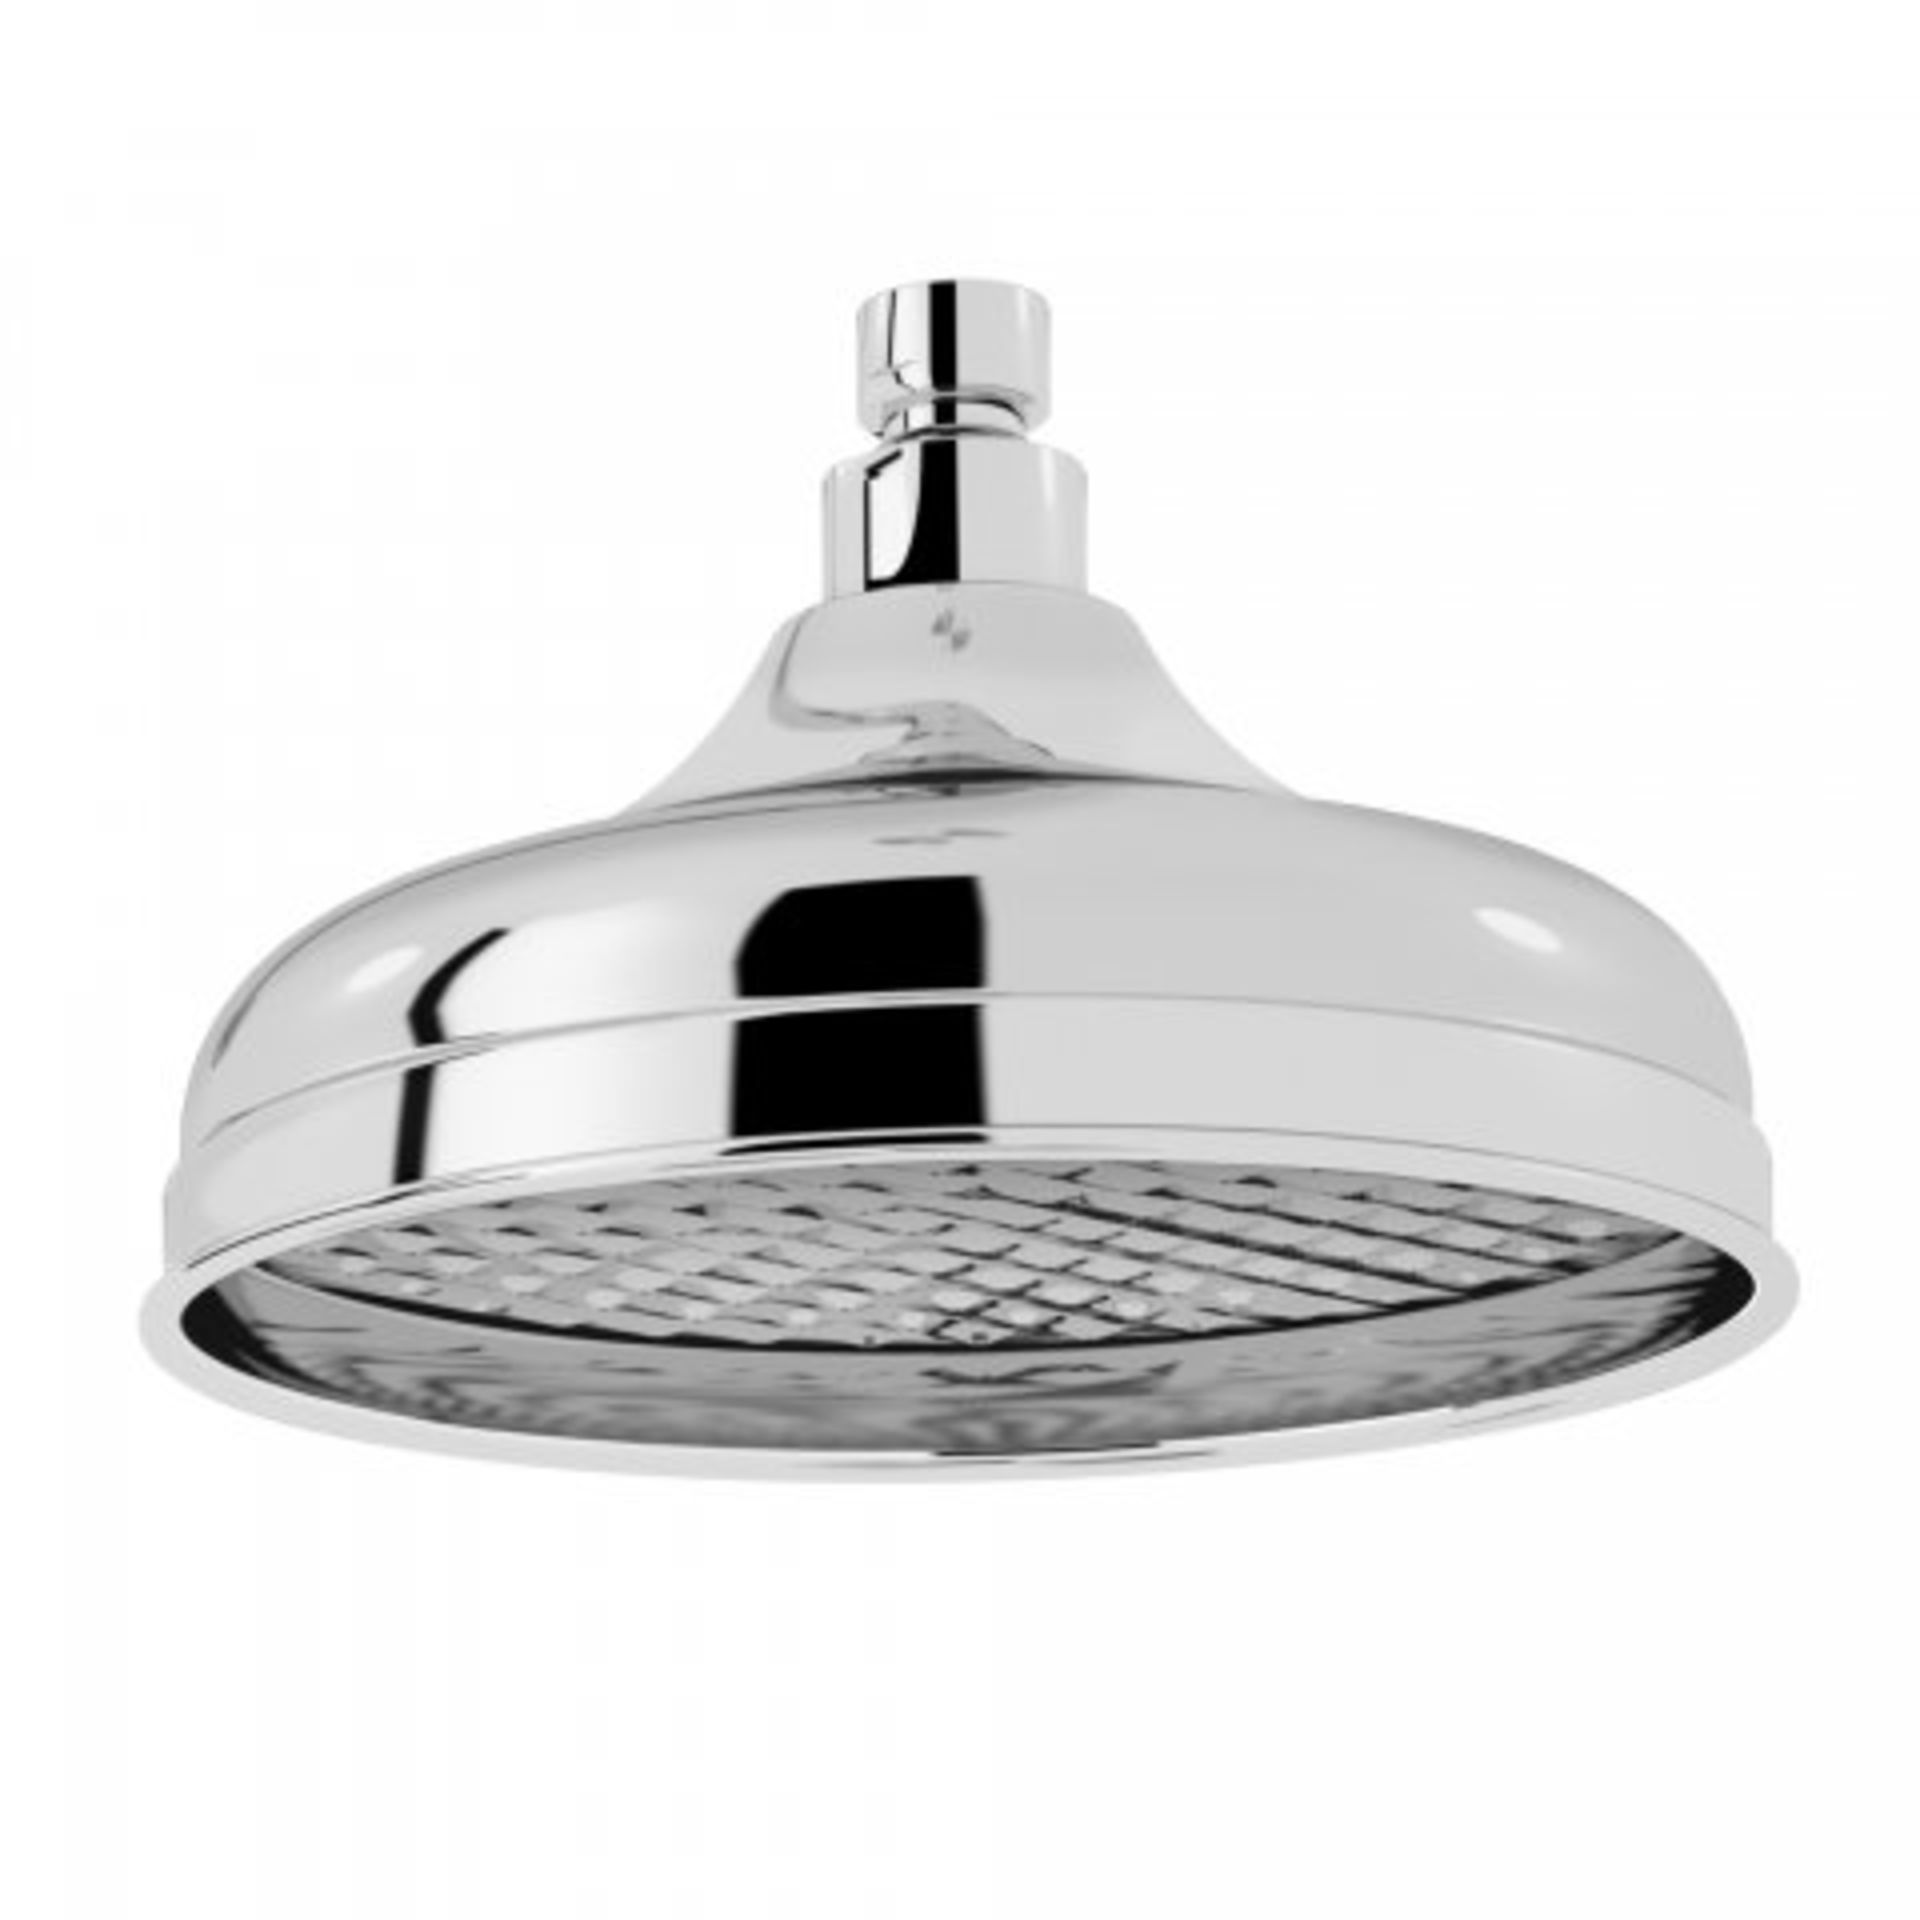 (REF146) 205mm Traditional Rain Chrome Plated Solid Brass Shower Head - Finest Range Our stunning - Image 3 of 3